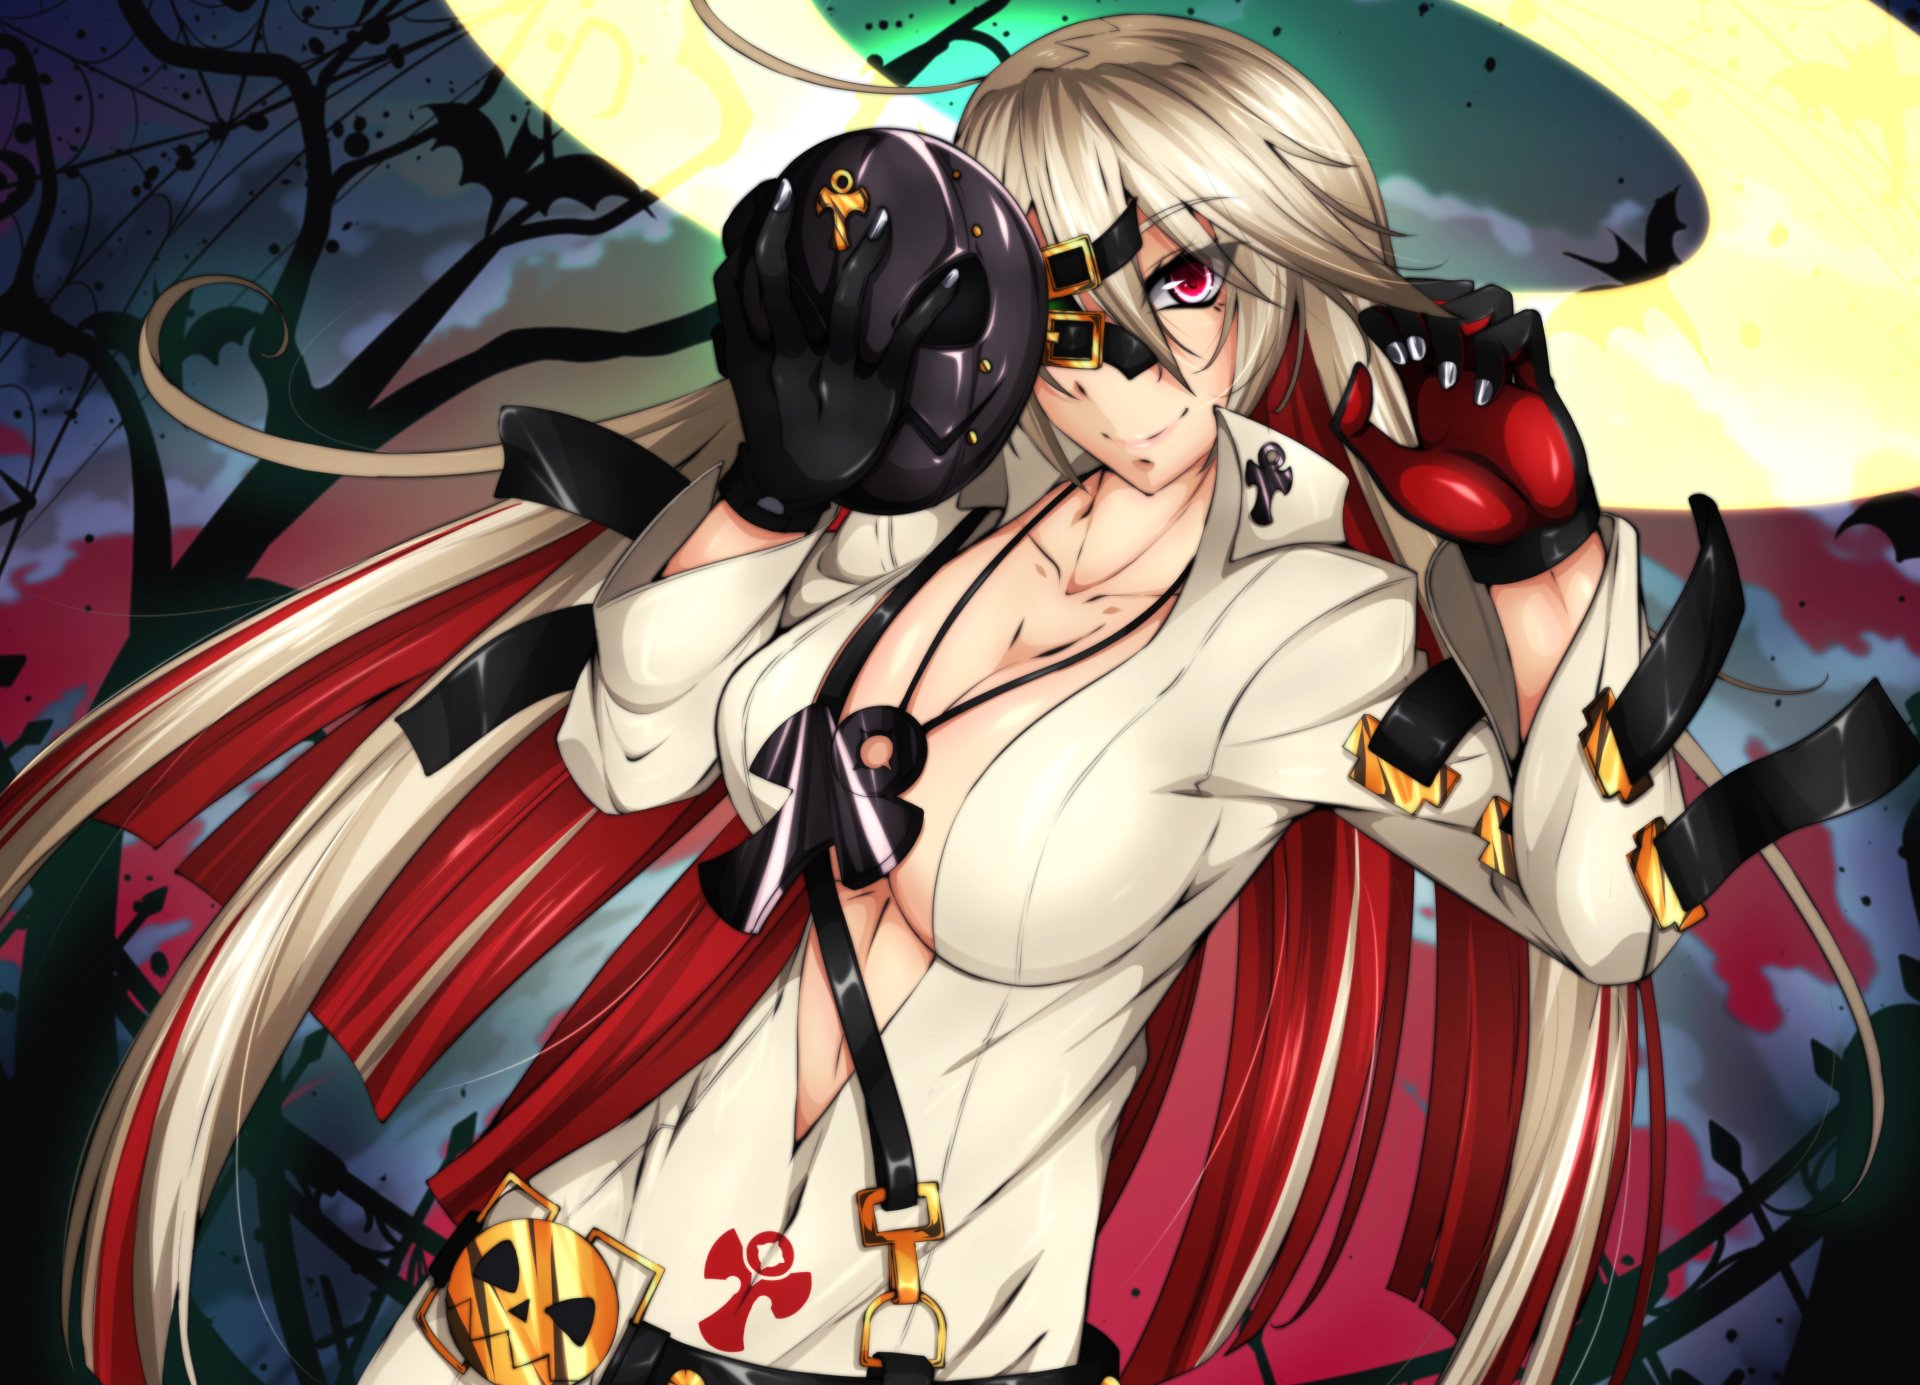 “Jack-O(from GUILTY GEAR Xrd series) #GGXrd #ギルティギア” .